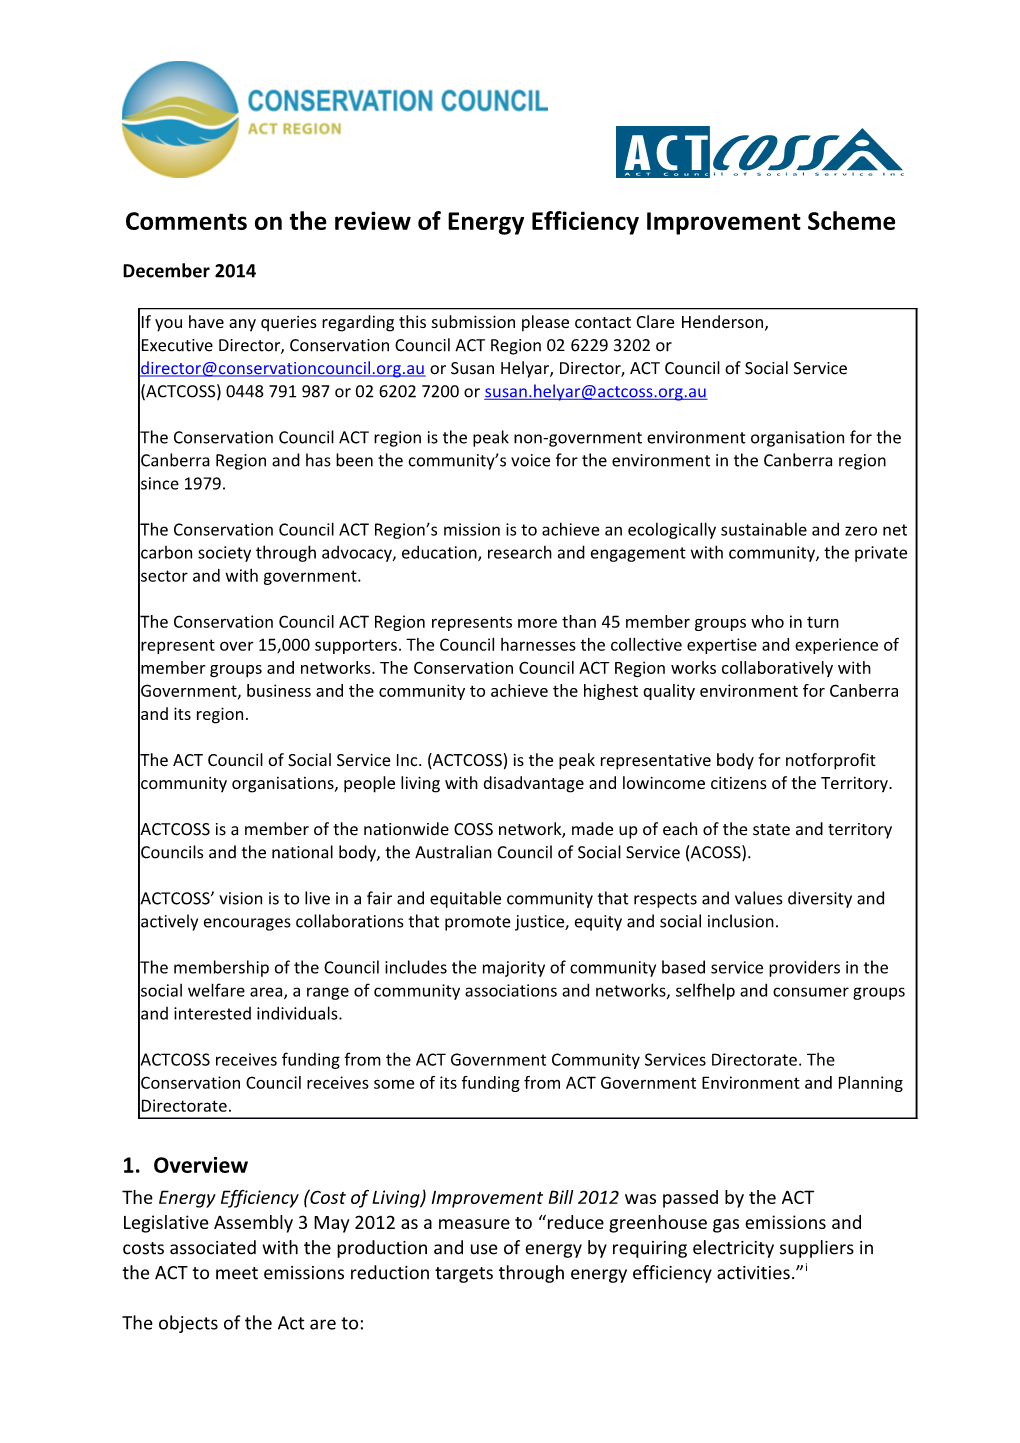 Comments on the Review of Energy Efficiency Improvement Scheme